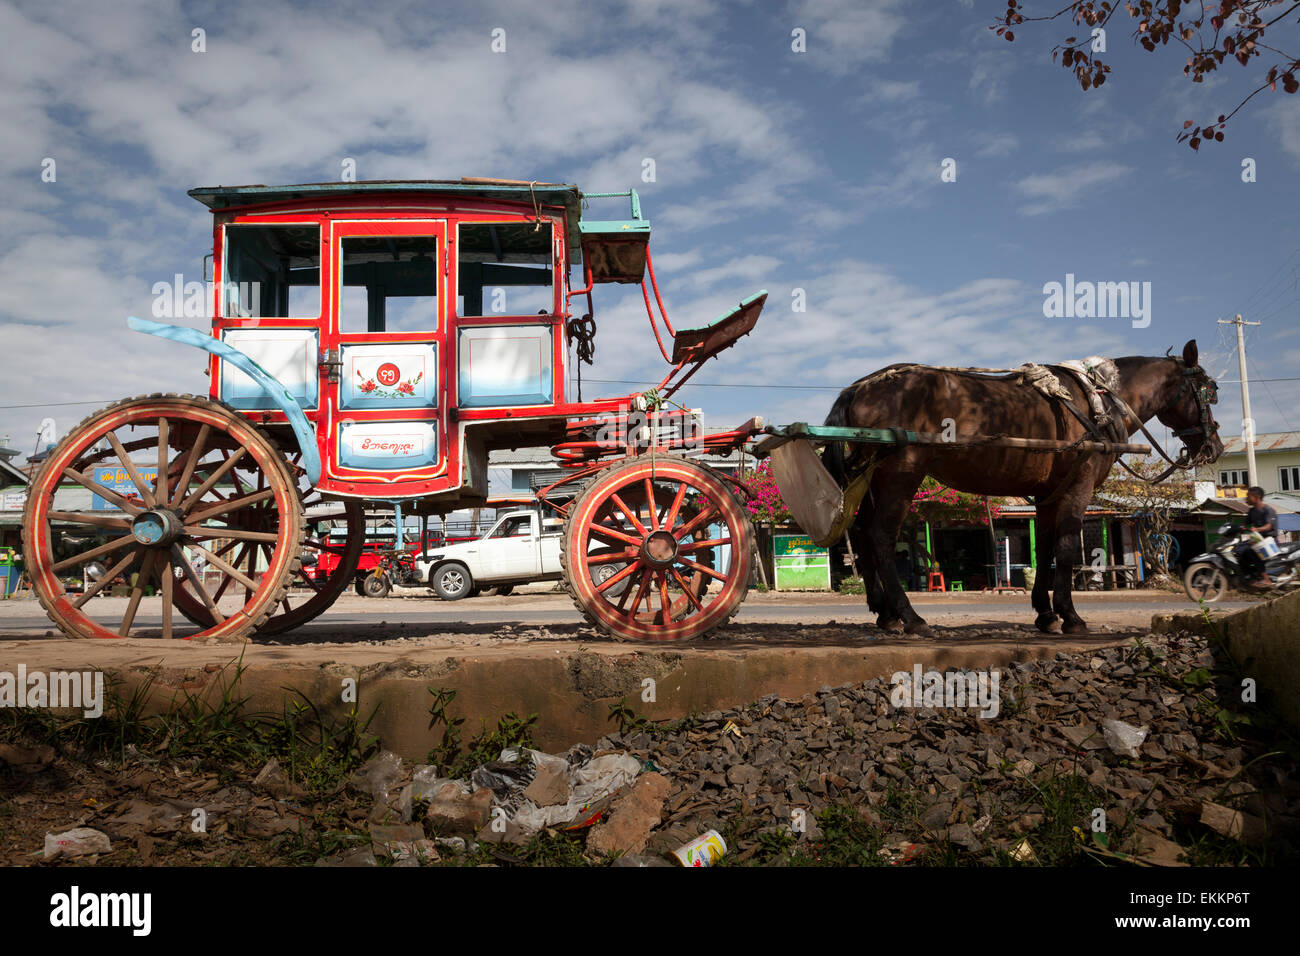 A horse and carriage waiting for passengers at Pinulin,Myanmar (Burma). Stock Photo